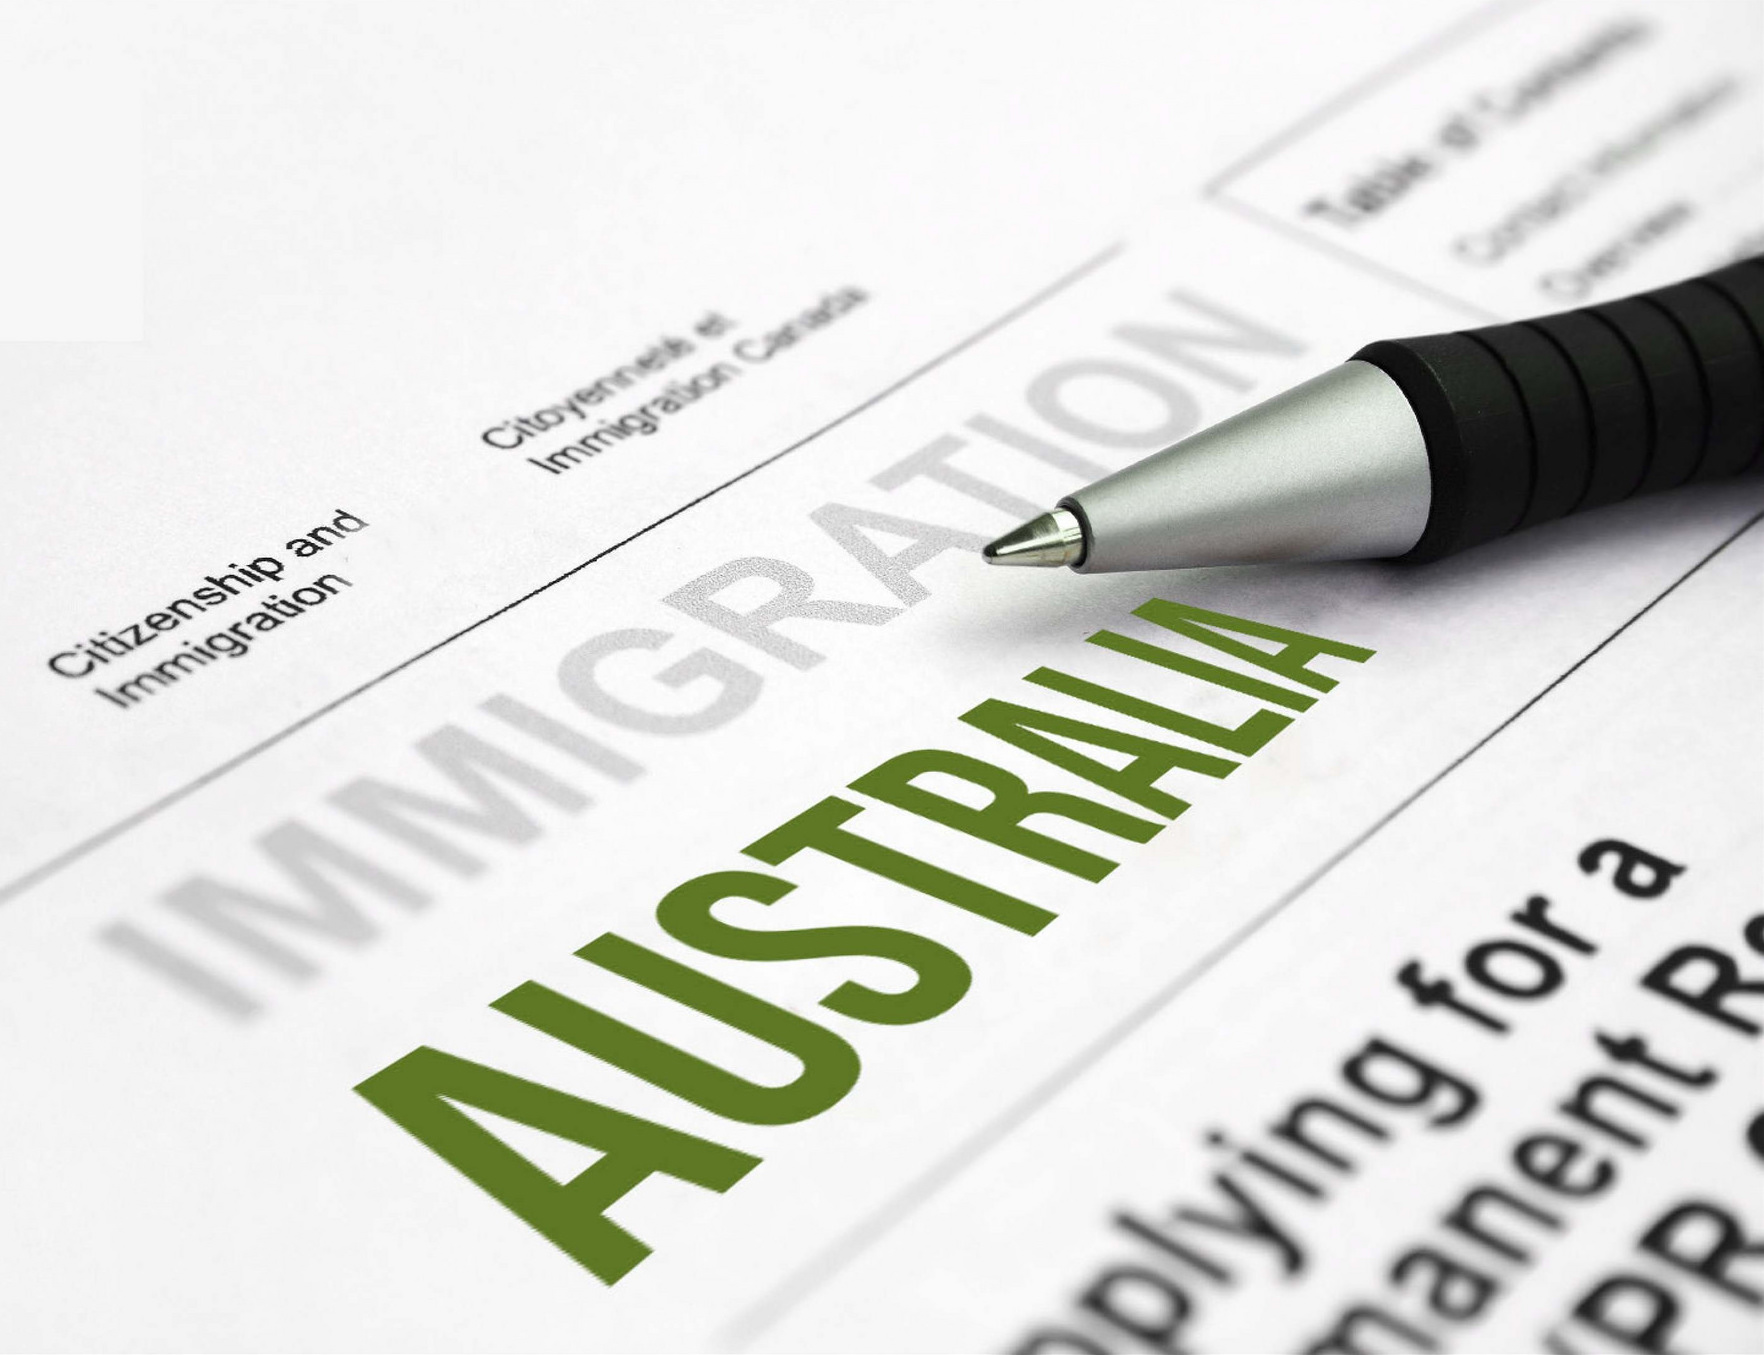 Tougher visa scrutiny that leads to fall of Skilled migration in Australia